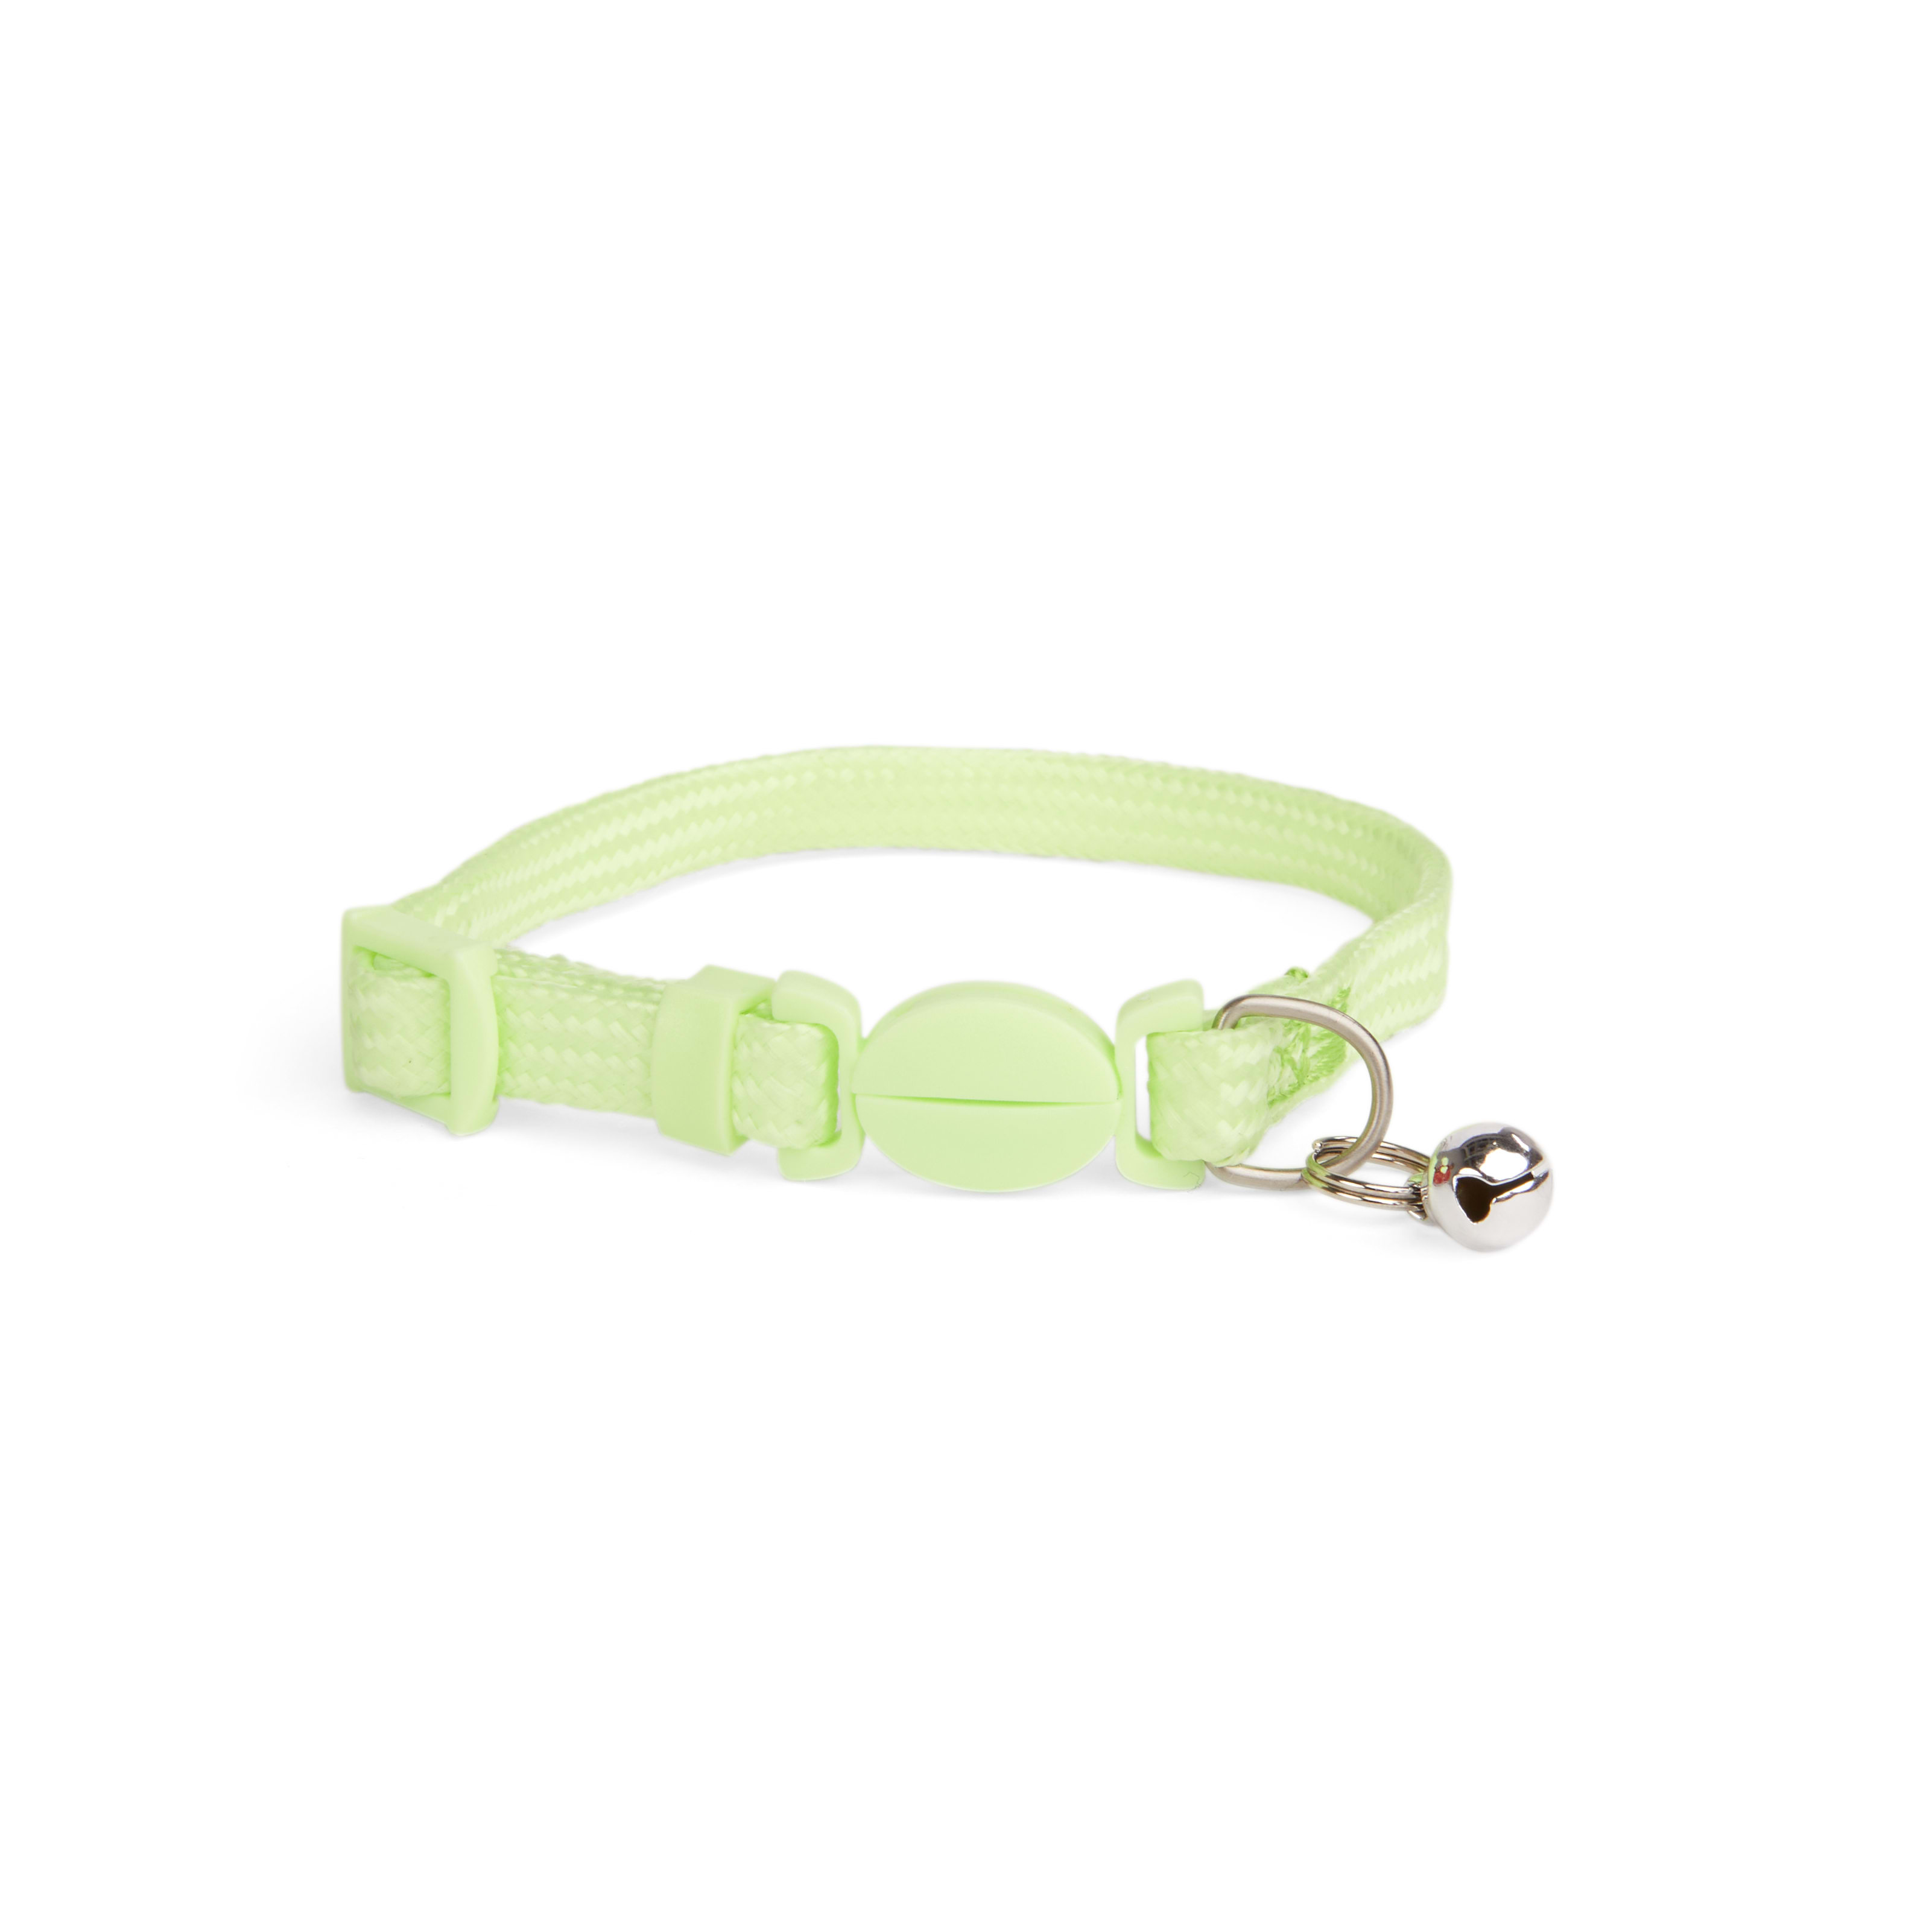 Wild Love- Pink Cat Collar with Safety Elastic Band